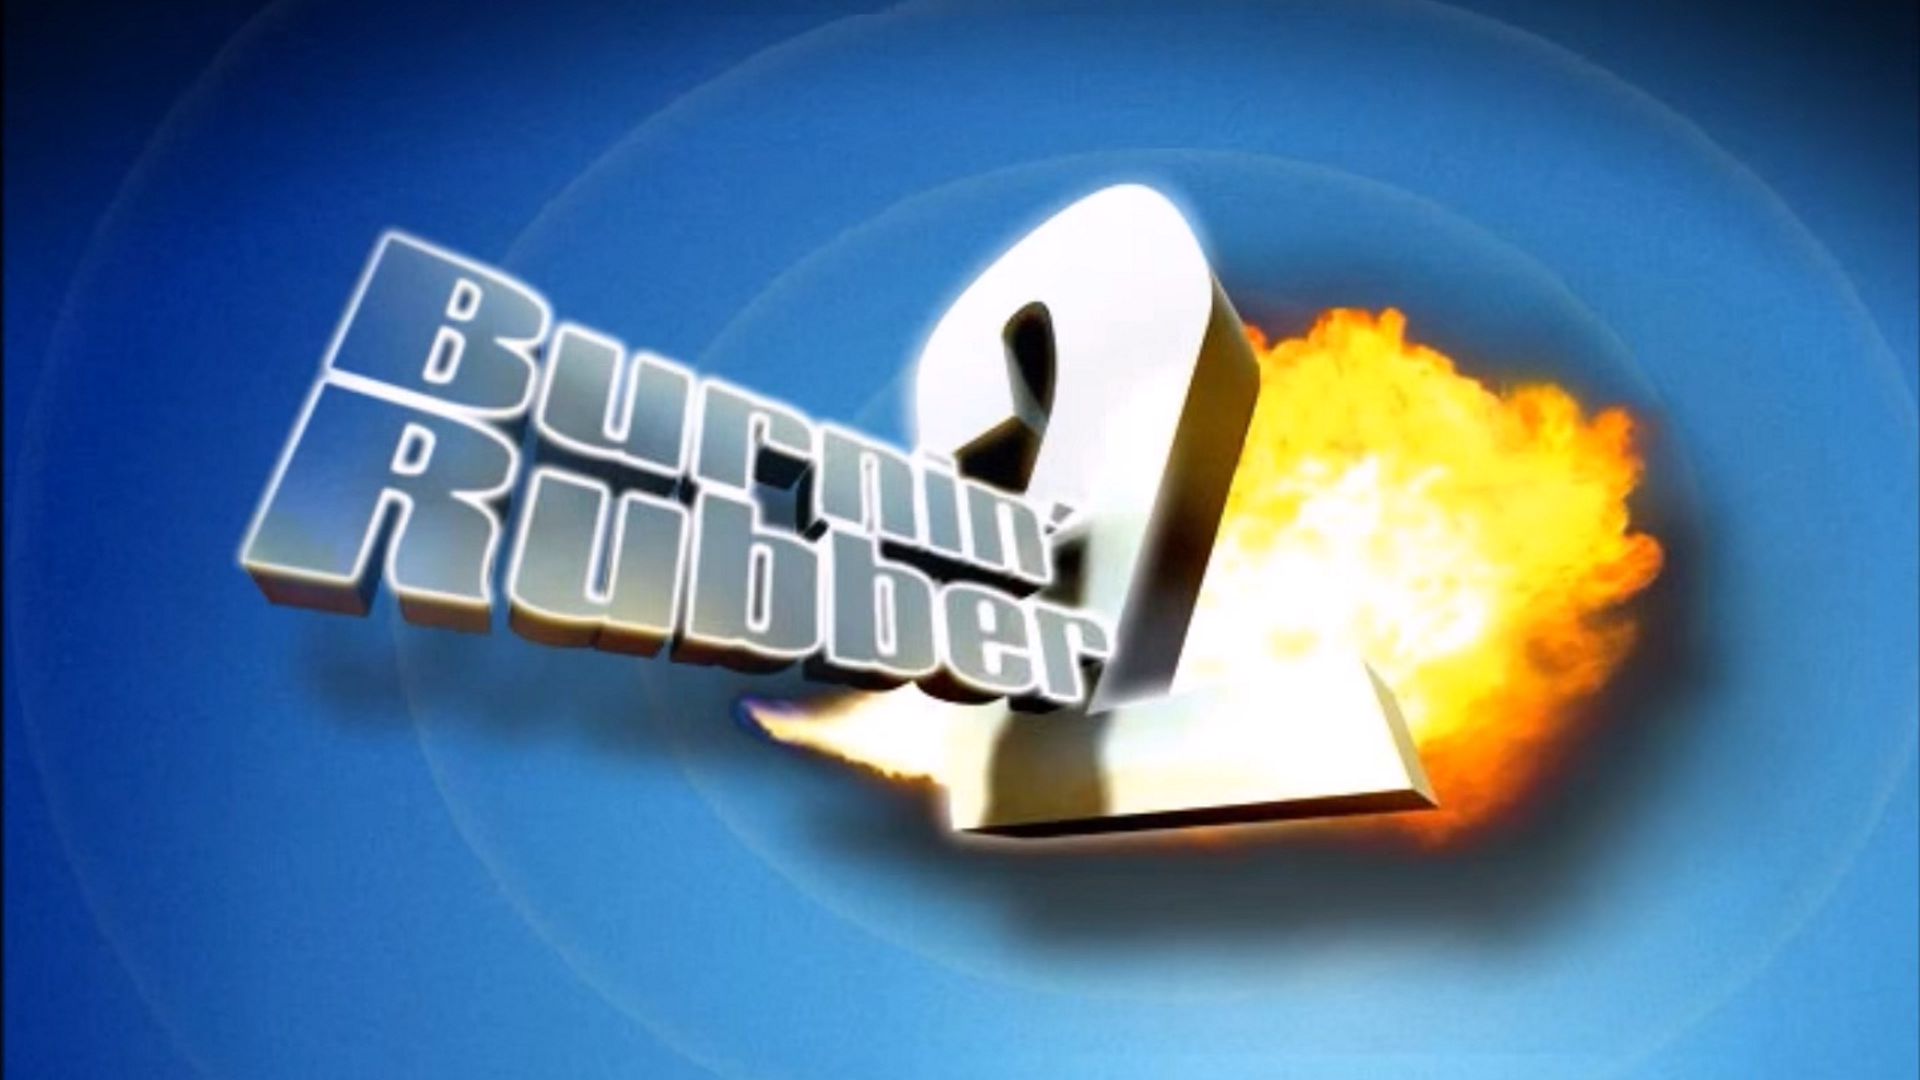 More information about "Burnin' Rubber 2 Stages"